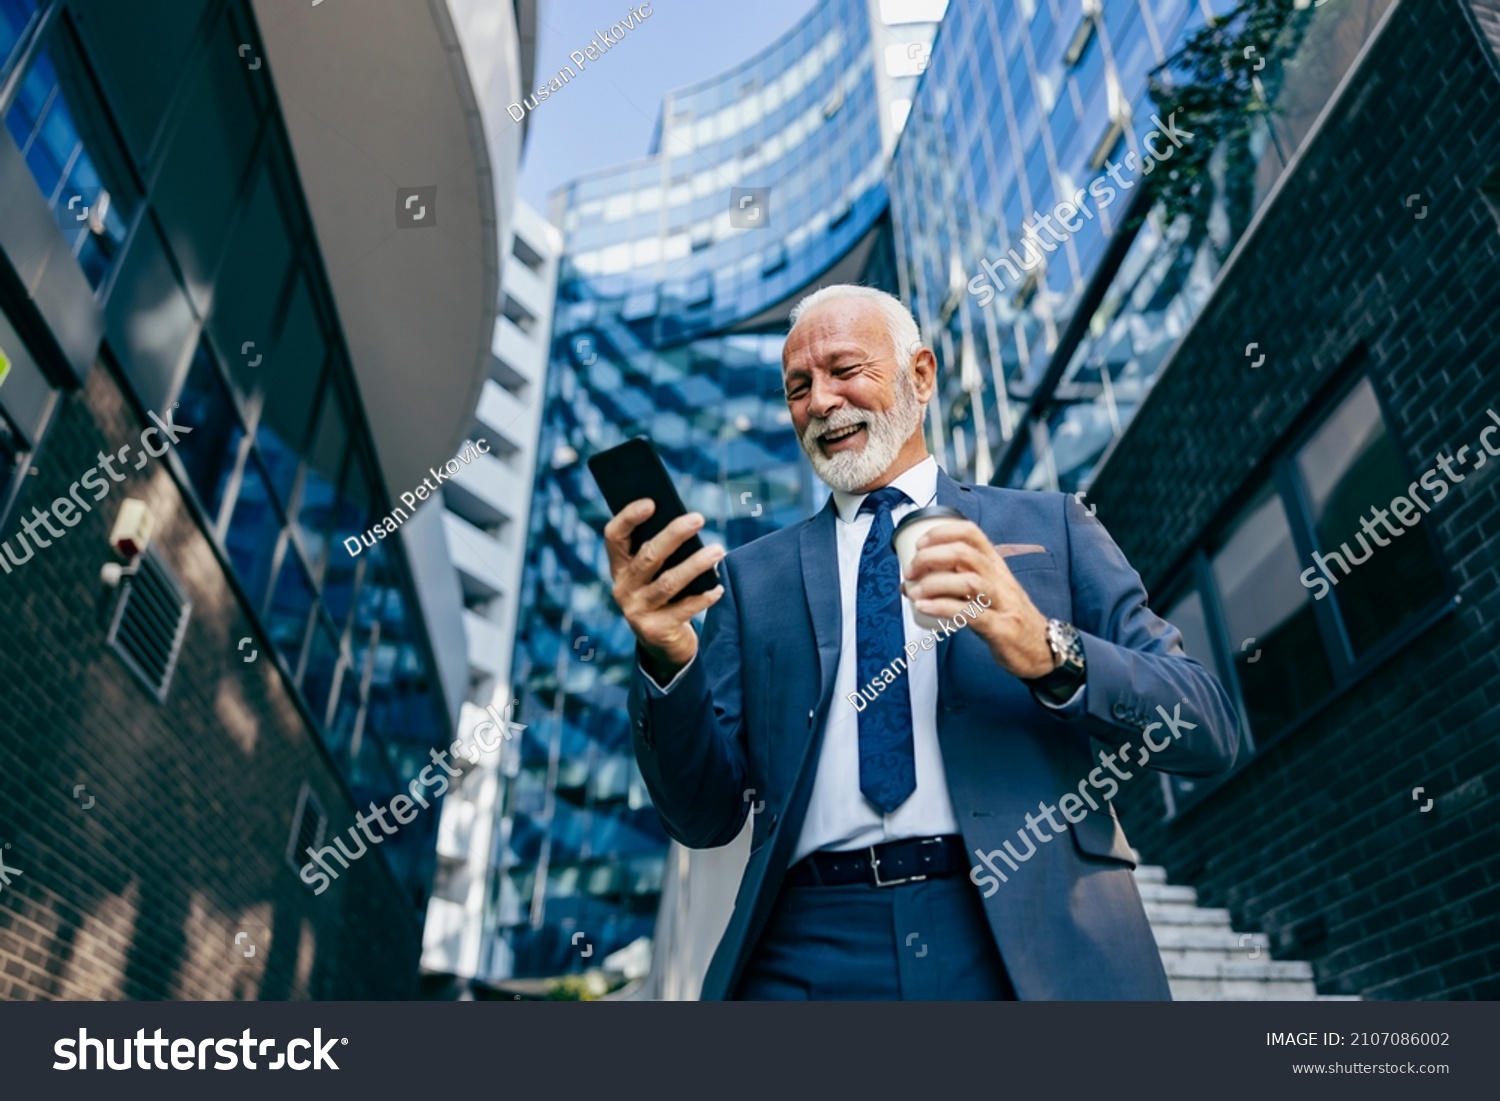 An old executive reading message on the phone at the business center. Low angle view of a happy senior businessman standing at the business center and reading a message on the phone. #2107086002